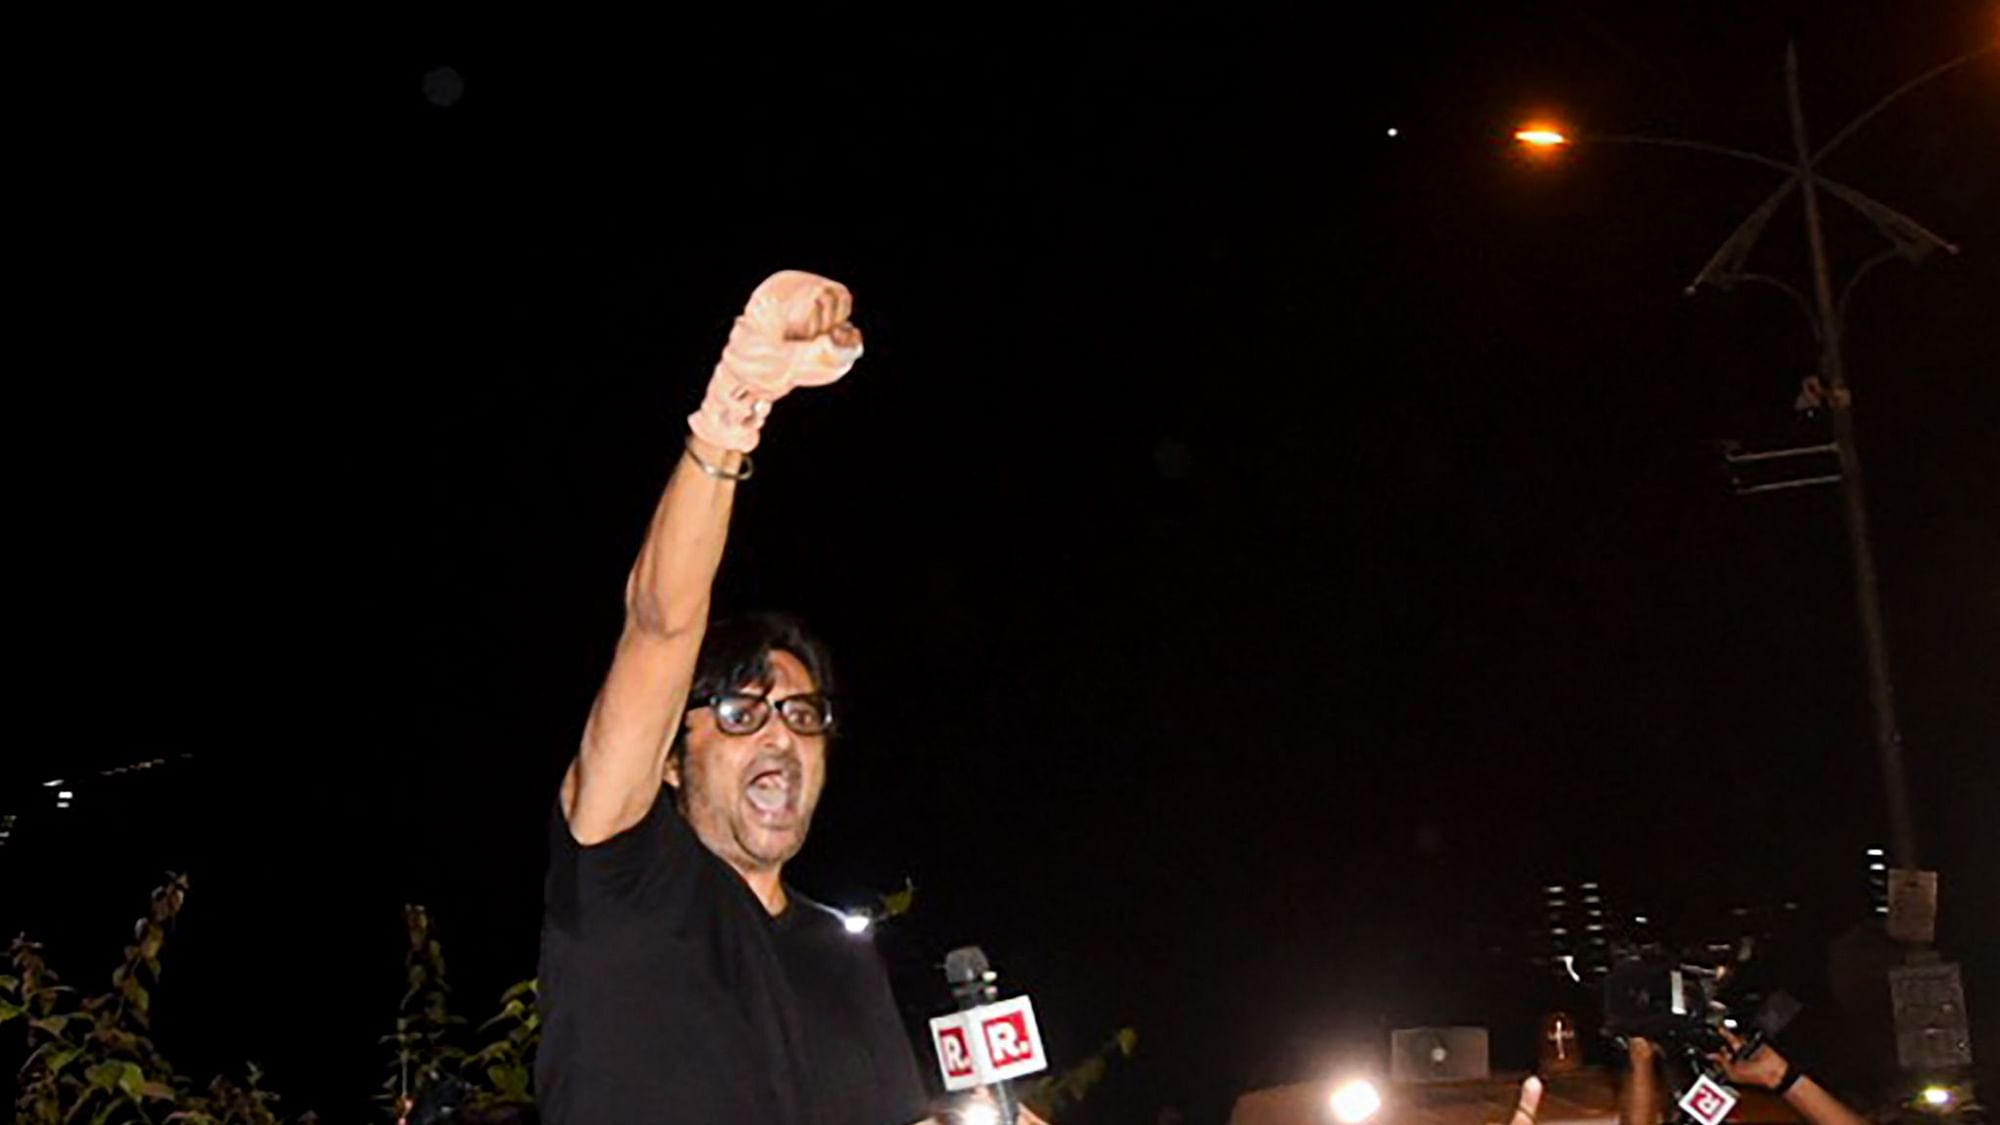  Republic TV editor-in-chief Arnab Goswami after being released from the Taloja Central Jail on interim bail in the 2018 abetment to suicide case, in Navi Mumbai, Wednesday, 11 November 2020. 